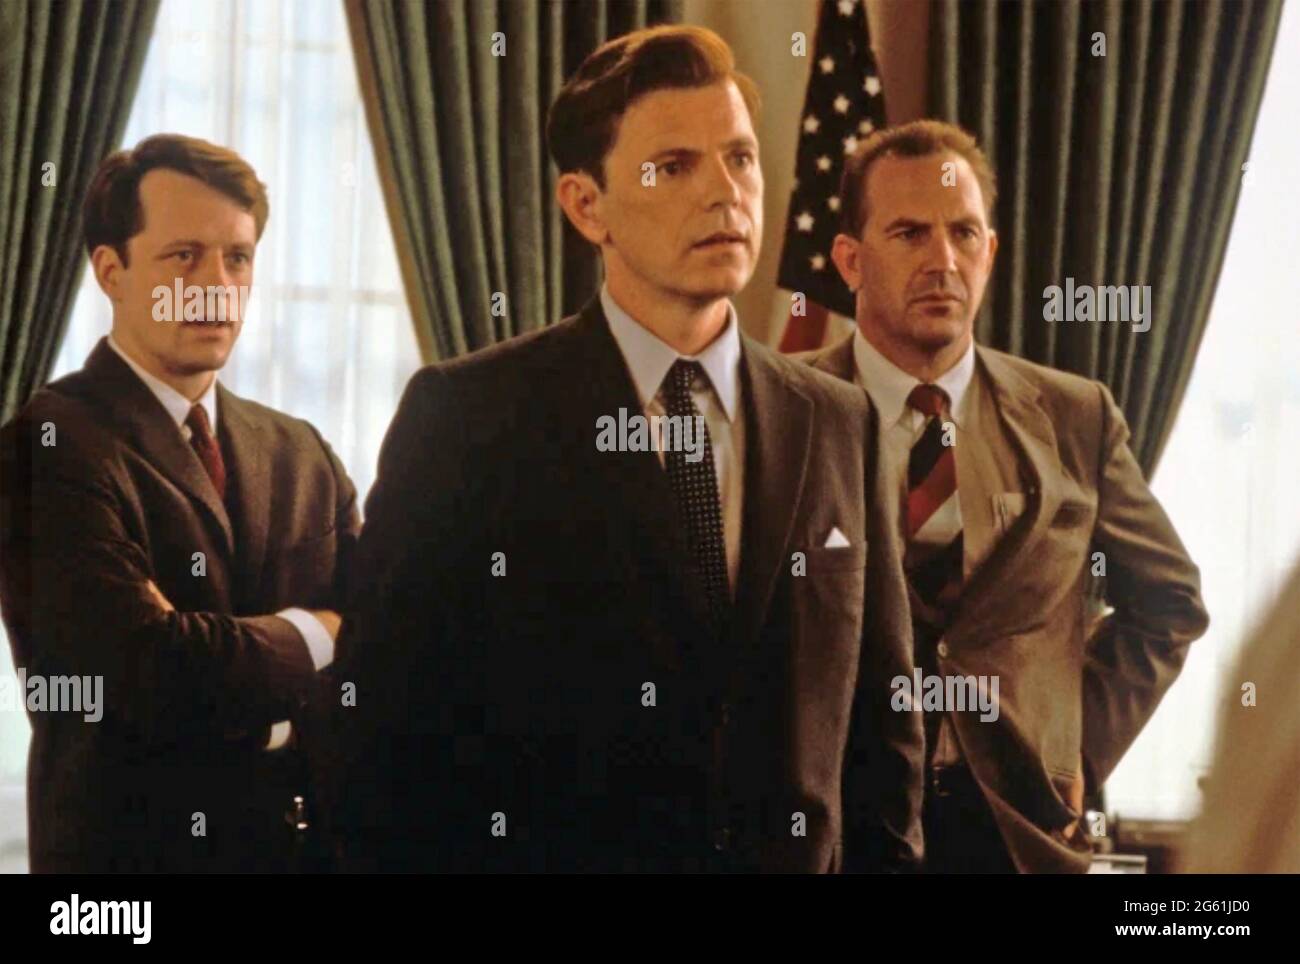 THIRTEEN DAYS 2000 New Line Cinema production with from left: Steven Culp as Attorney General Robert F. Kennedy , Bruce Greenwood as President John F. Kennedy , Kevin Costner as Special Assistant to the President. Stock Photo